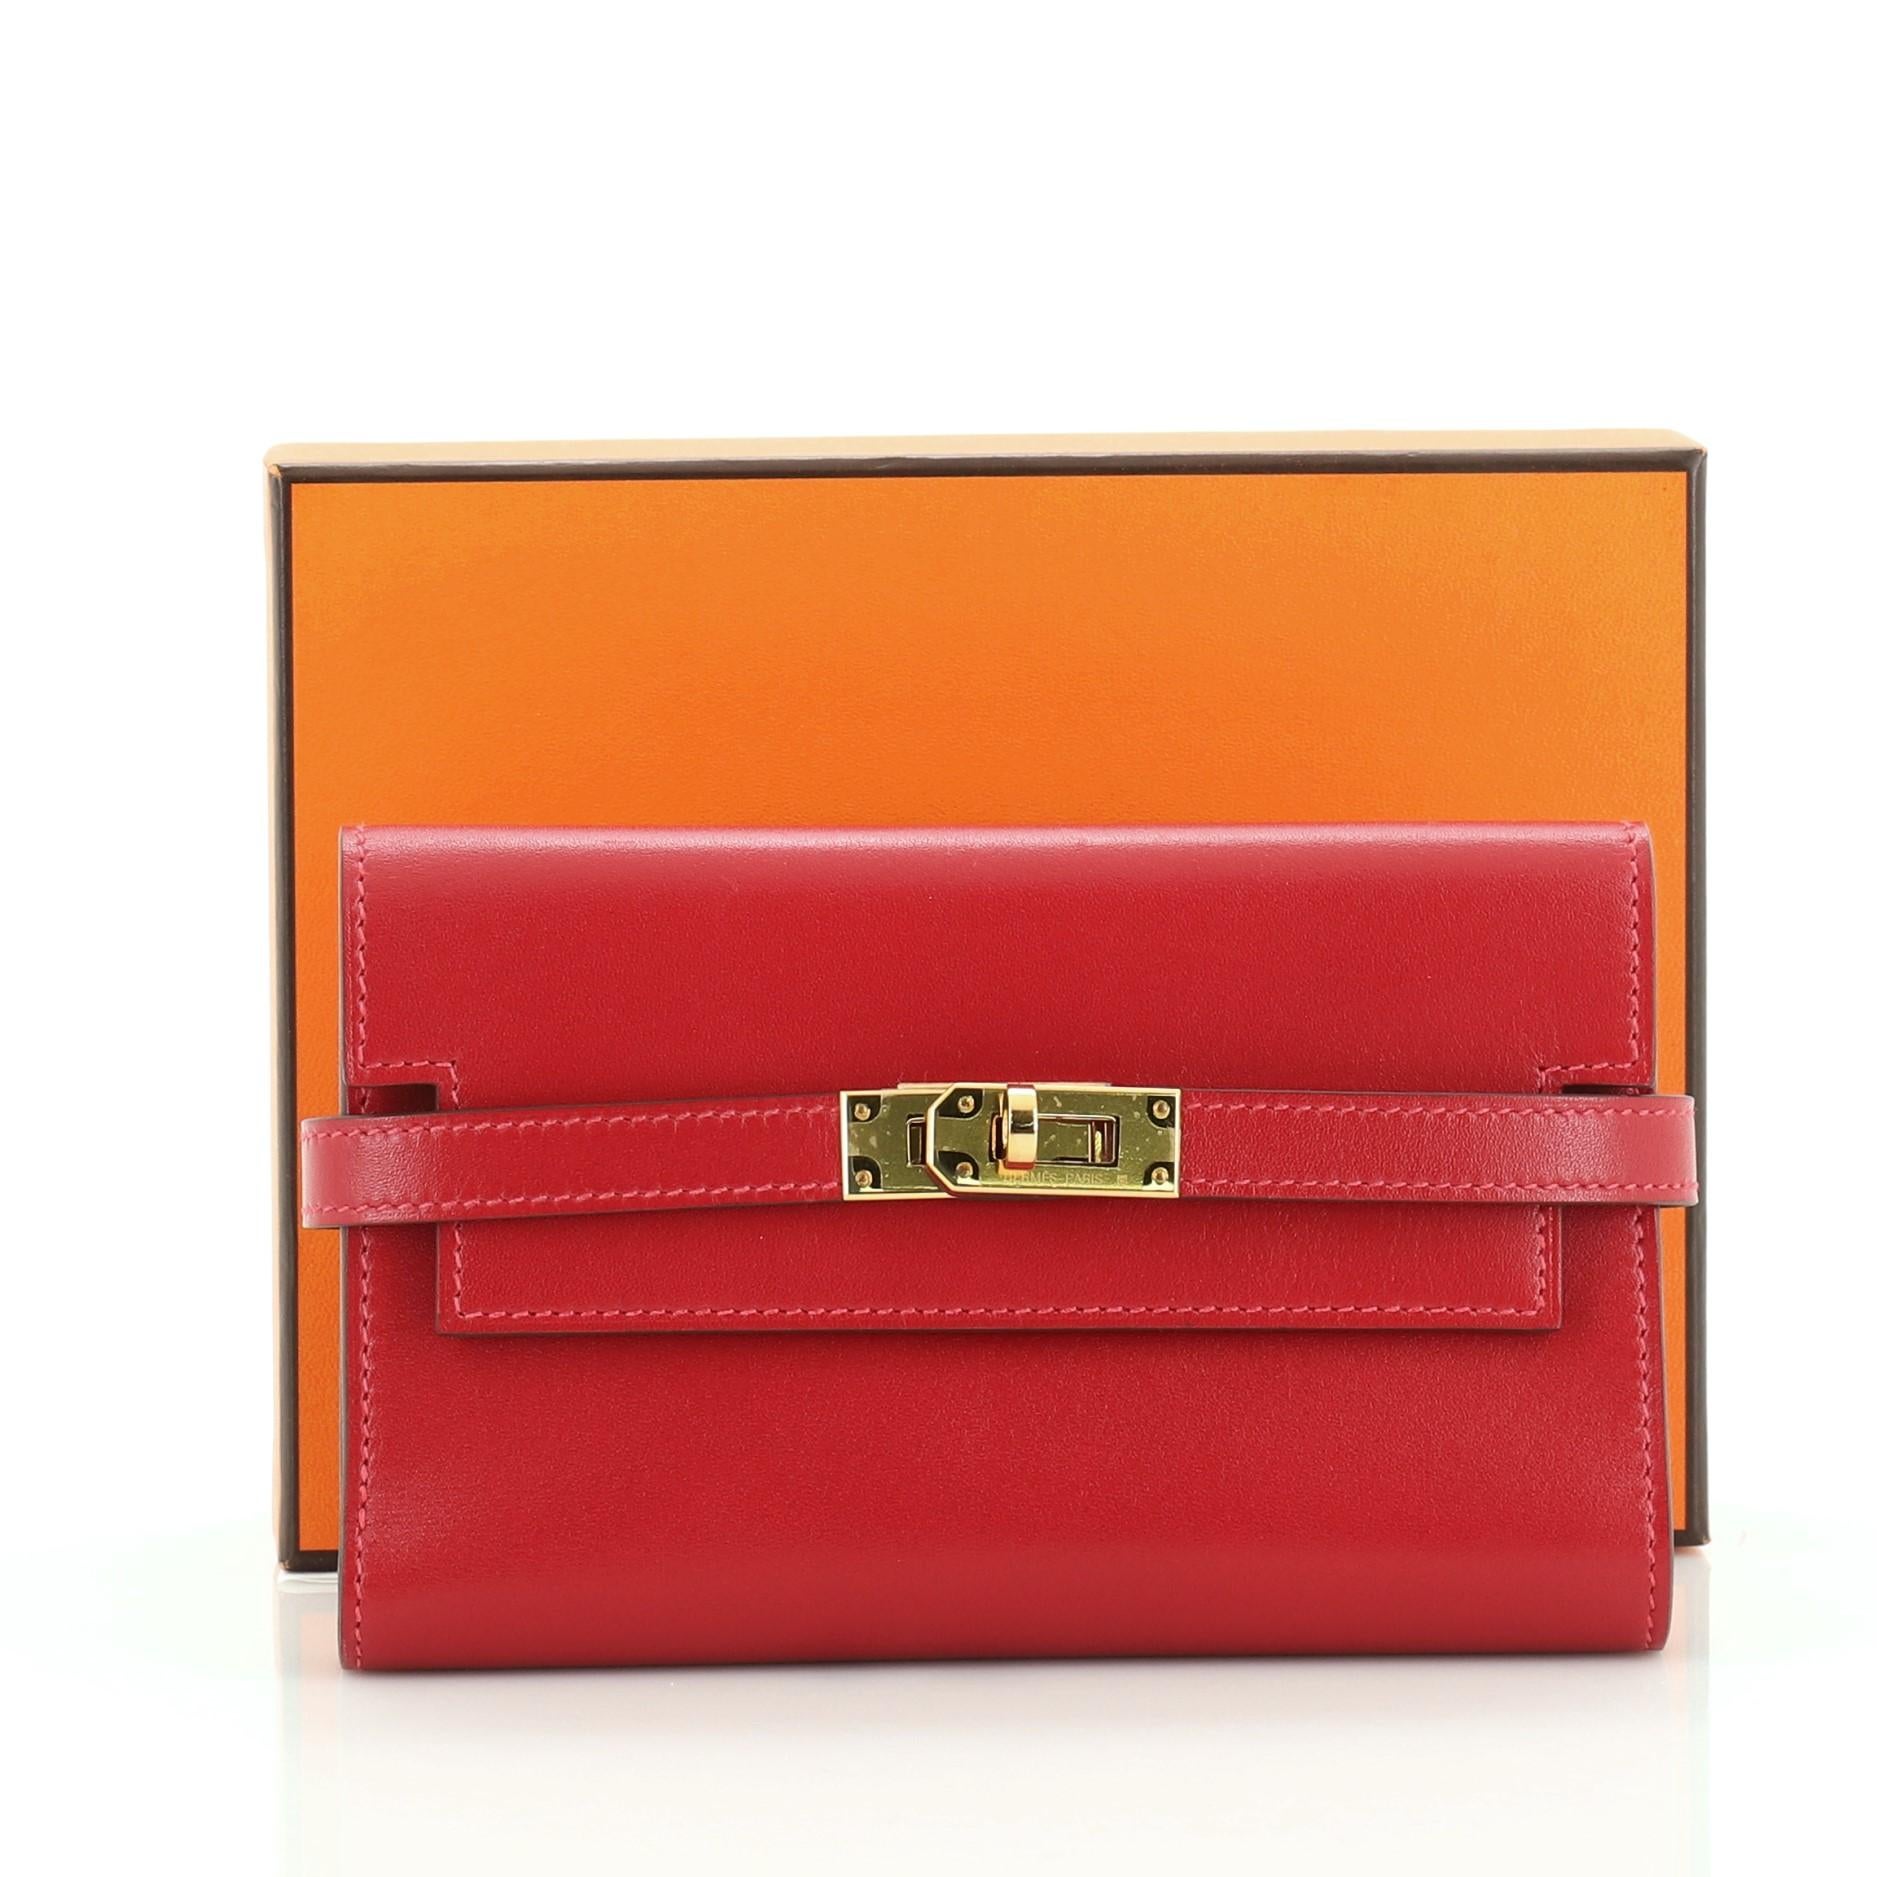 This Hermes Kelly Depliant Wallet Tadelakt Medium, crafted in Rouge Vif red Tadelakt leather, features its iconic turn-lock closure, subtle Hermes logo at its center and gold hardware. It opens to a Rouge Vif red Tadelakt leather with a middle